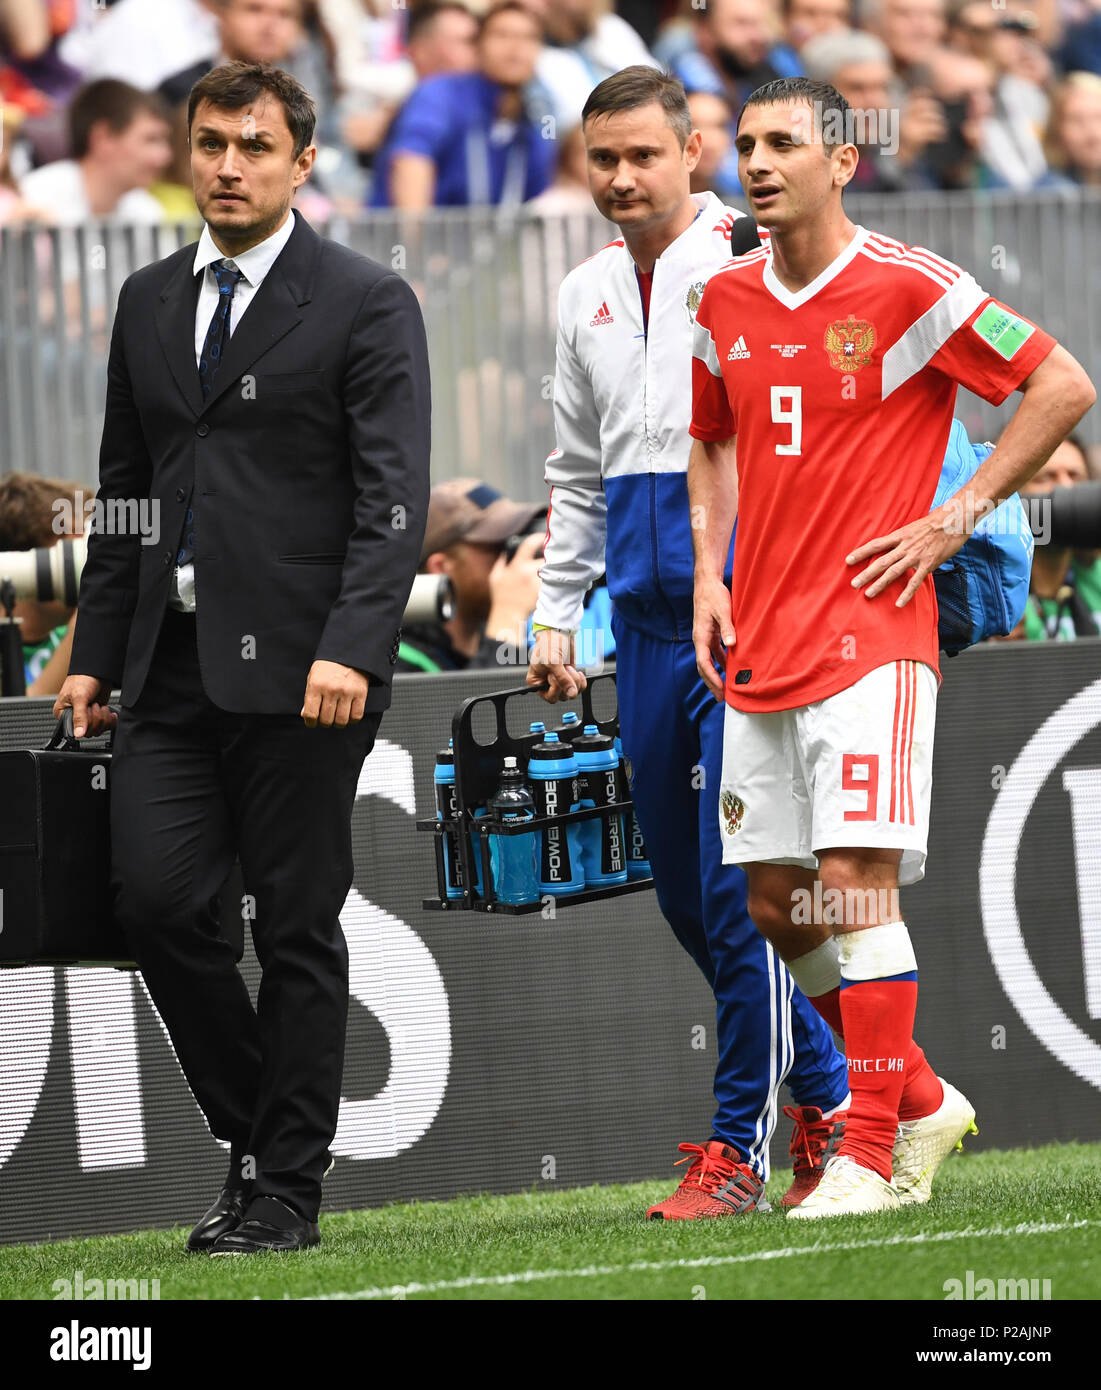 Moscow, Russia. 14th June, 2018. Moscow, Russia. 14th June, 2018. Soccer; FIFA World Cup, First Round, Group A, First Matchday, Russia vs. Saudi Arabia at the Luzhniki Stadium: Alan Dsagojew from Russia leaves the match after an injury. Photo: Federico Gambarini/dpa Credit: dpa picture alliance/Alamy Live News Credit: dpa picture alliance/Alamy Live News Stock Photo